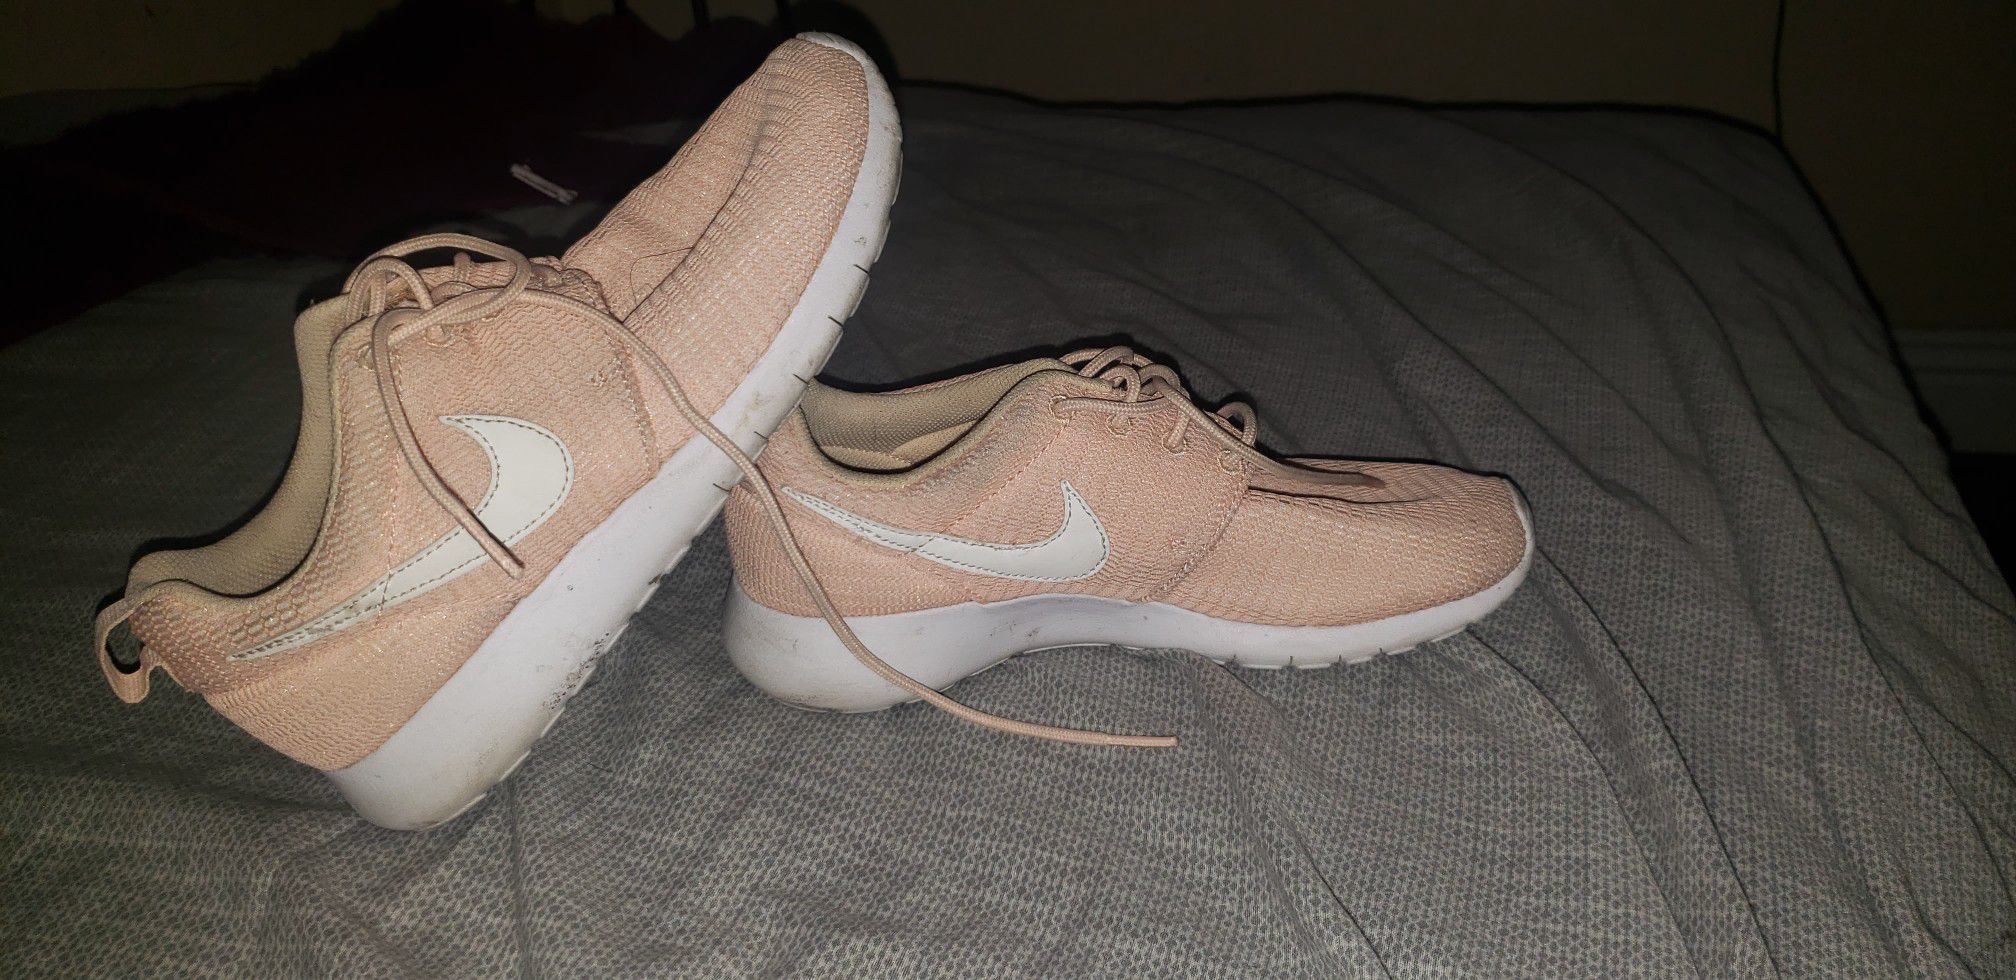 Nike running shoes size 5